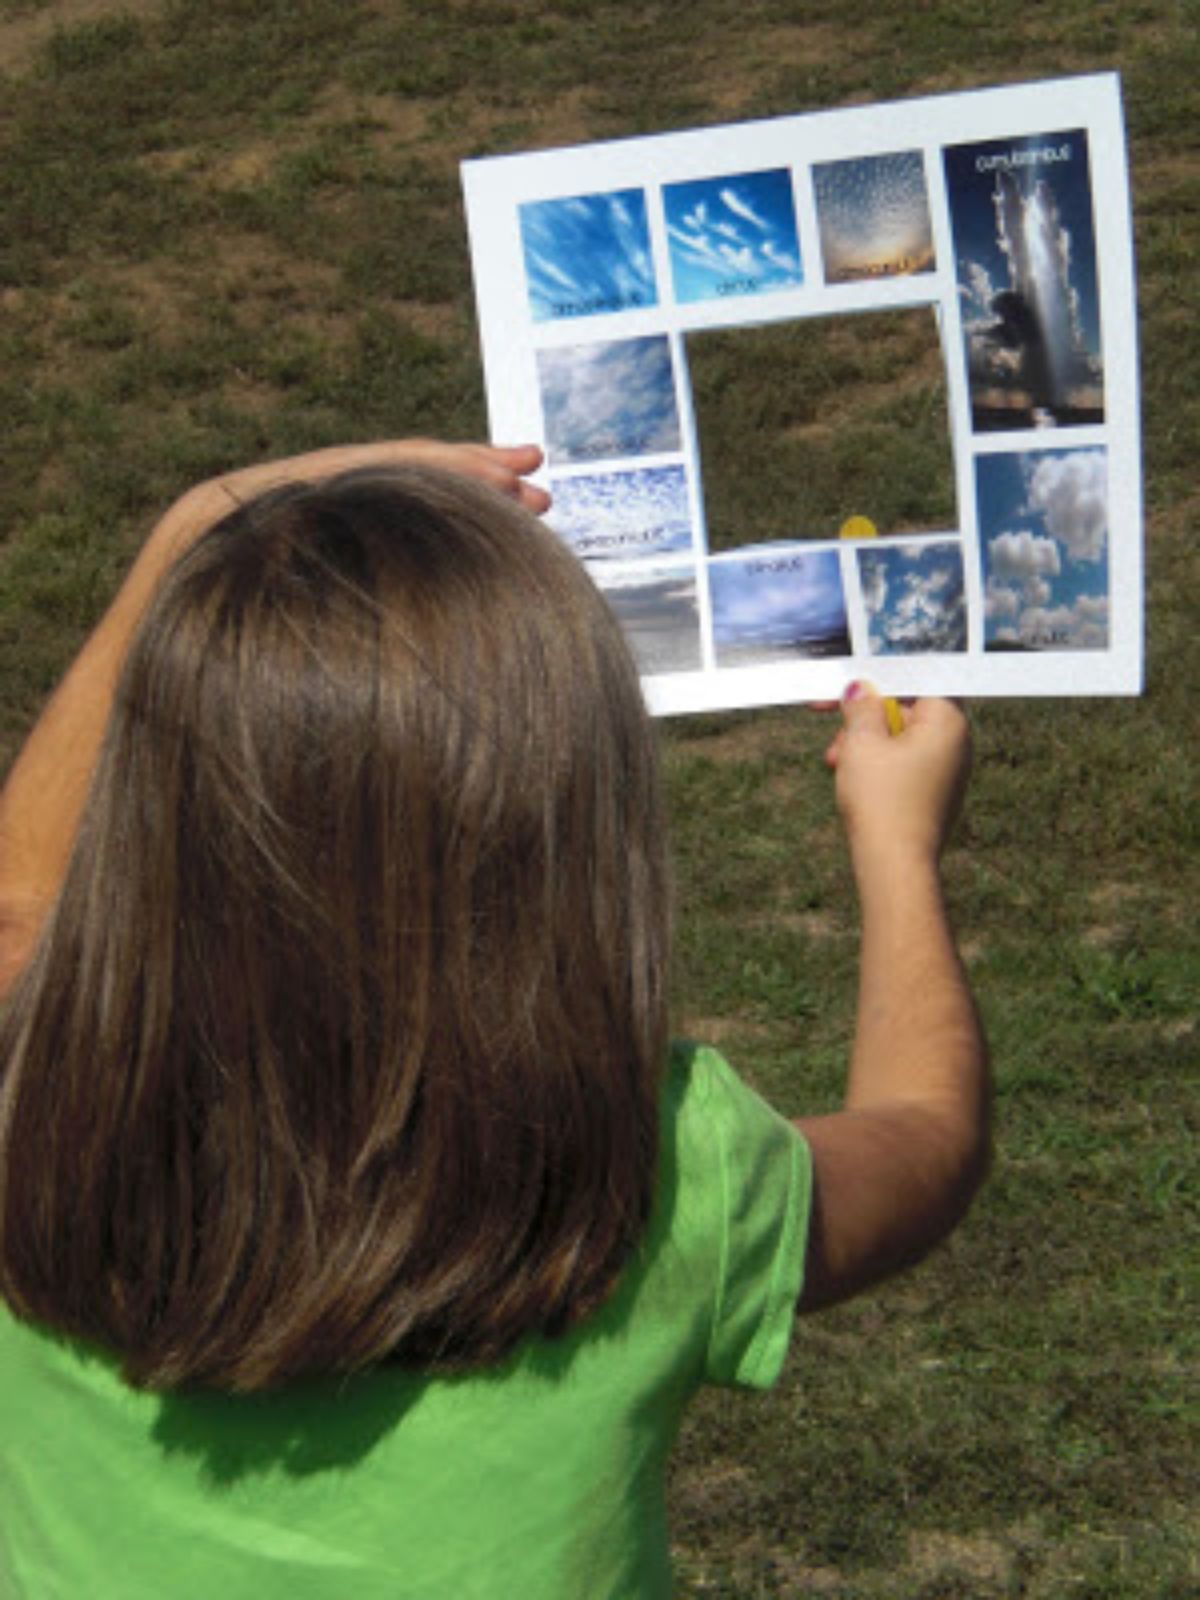 a child in a green shirt holds up a card with photos of clouds on it